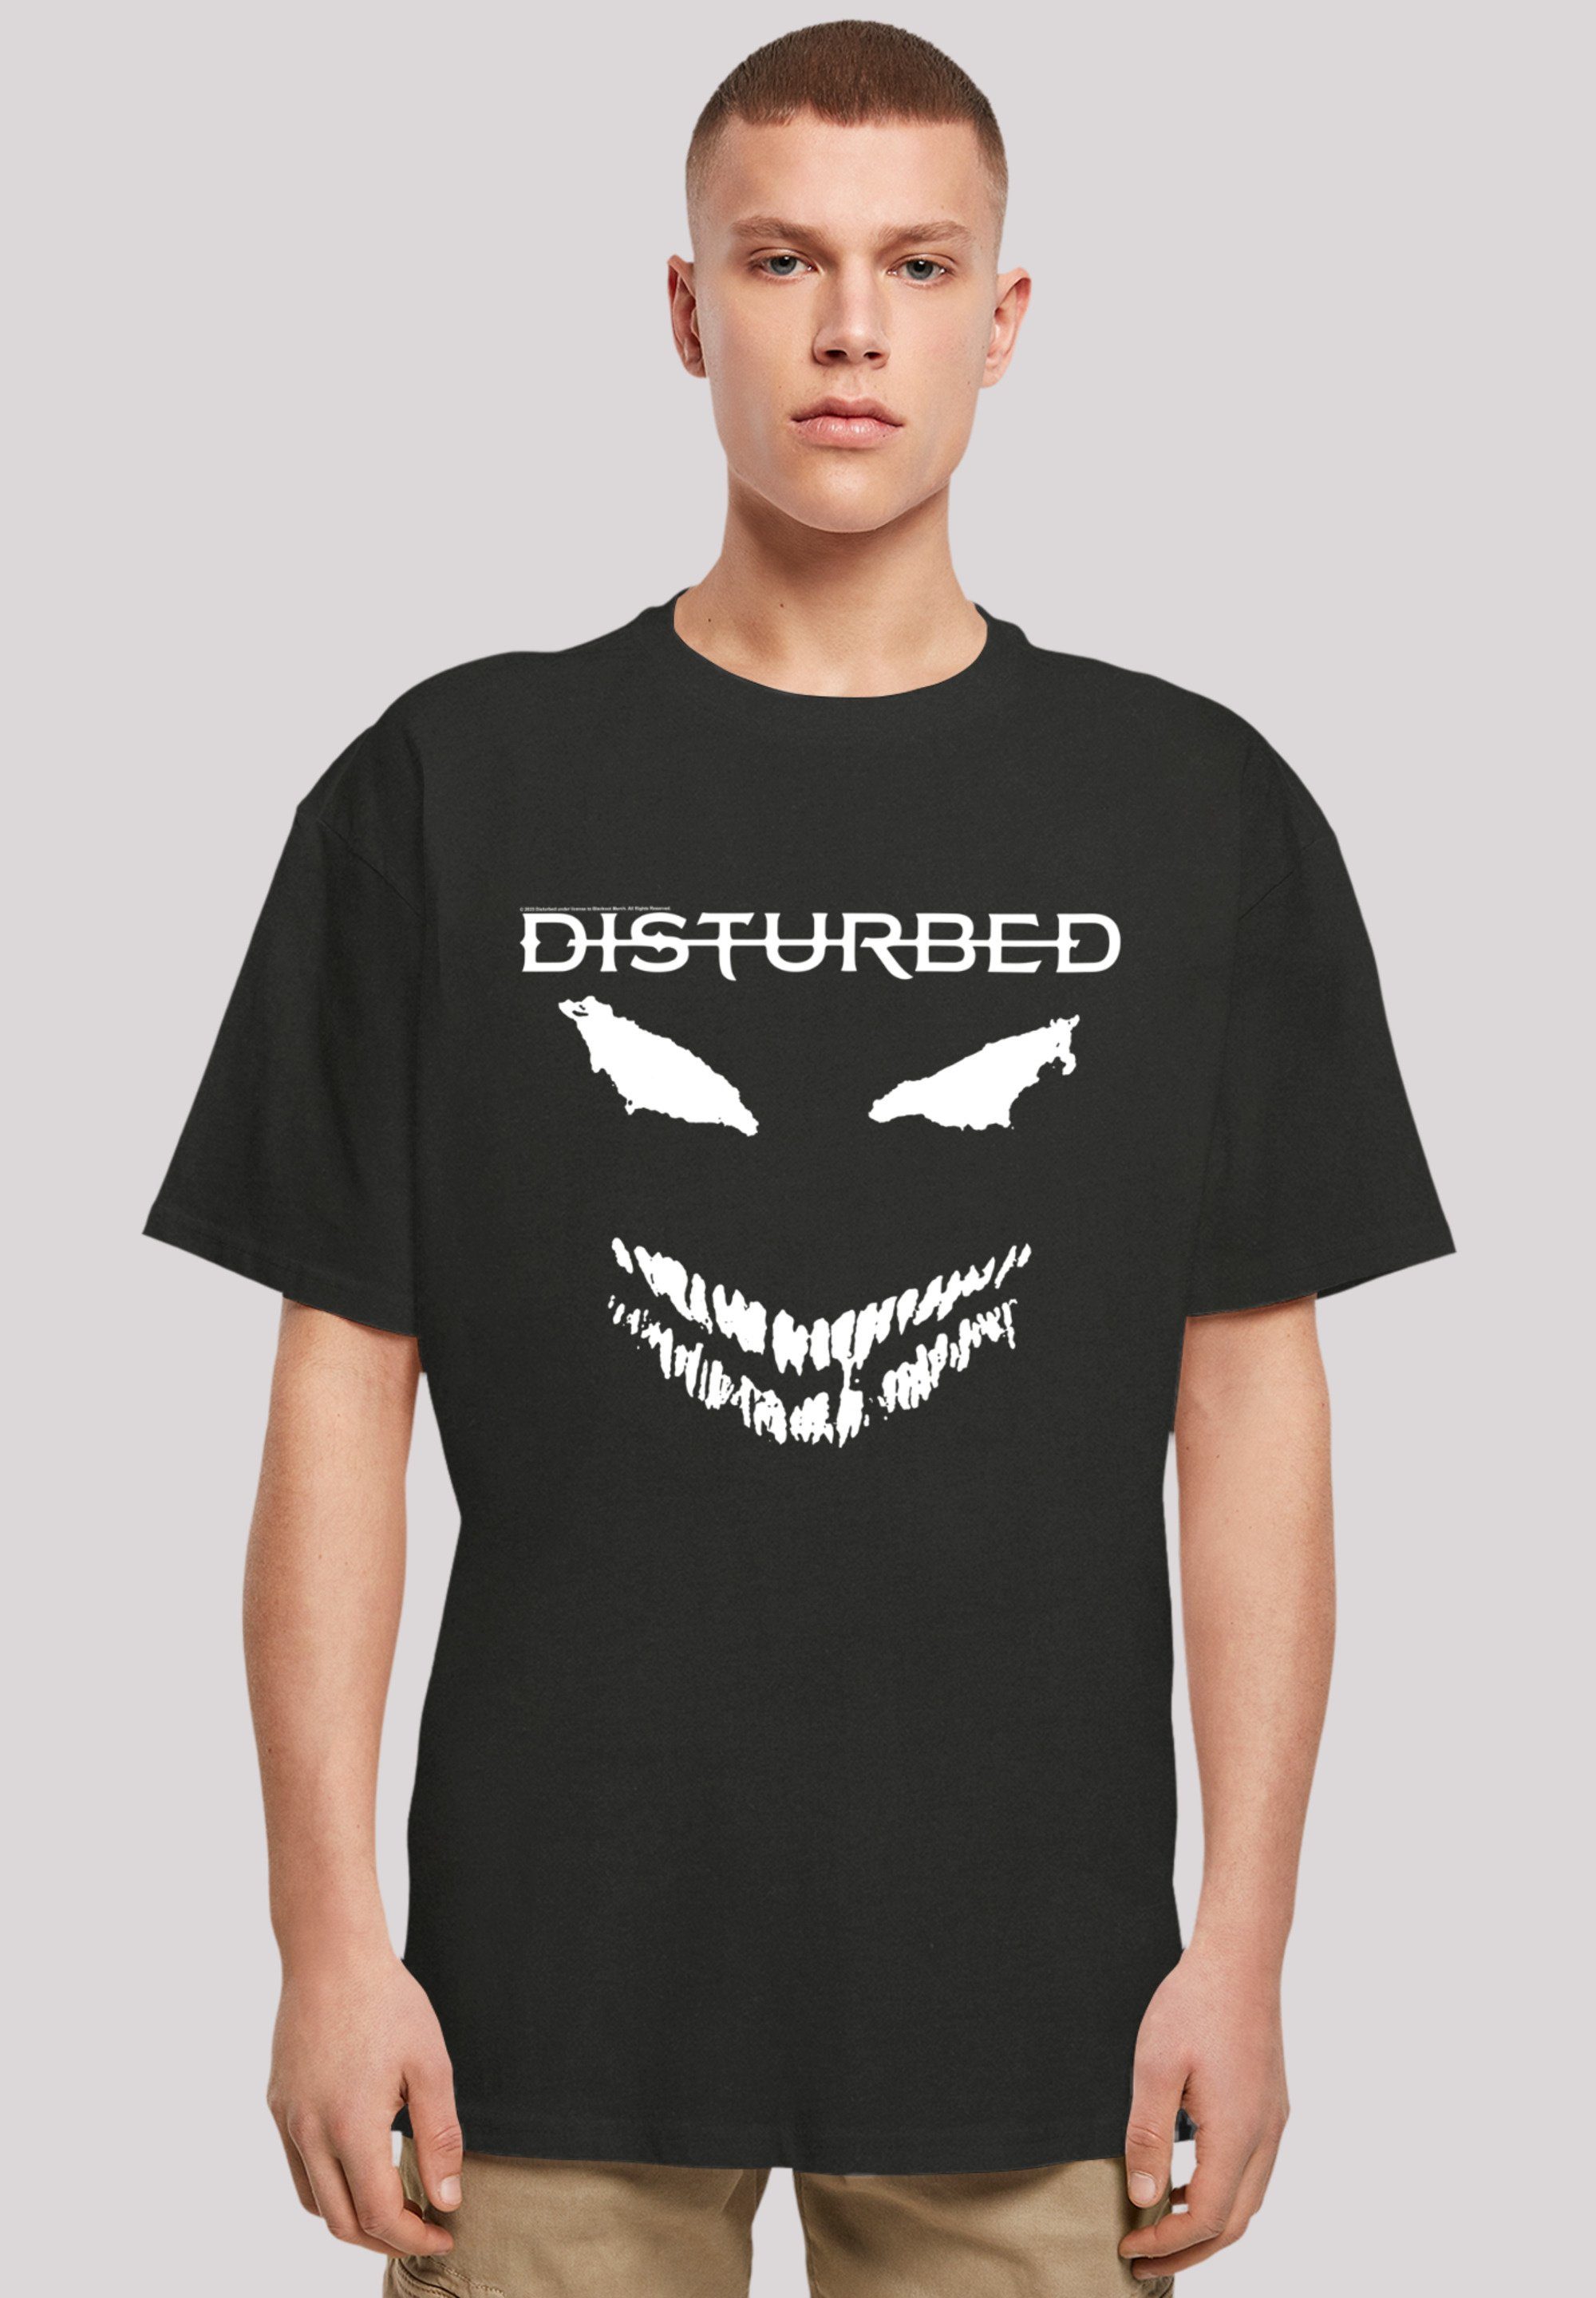 F4NT4STIC T-Shirt Disturbed Heavy Metal Scary Face Candle Premium Qualität, Rock-Musik, Band schwarz